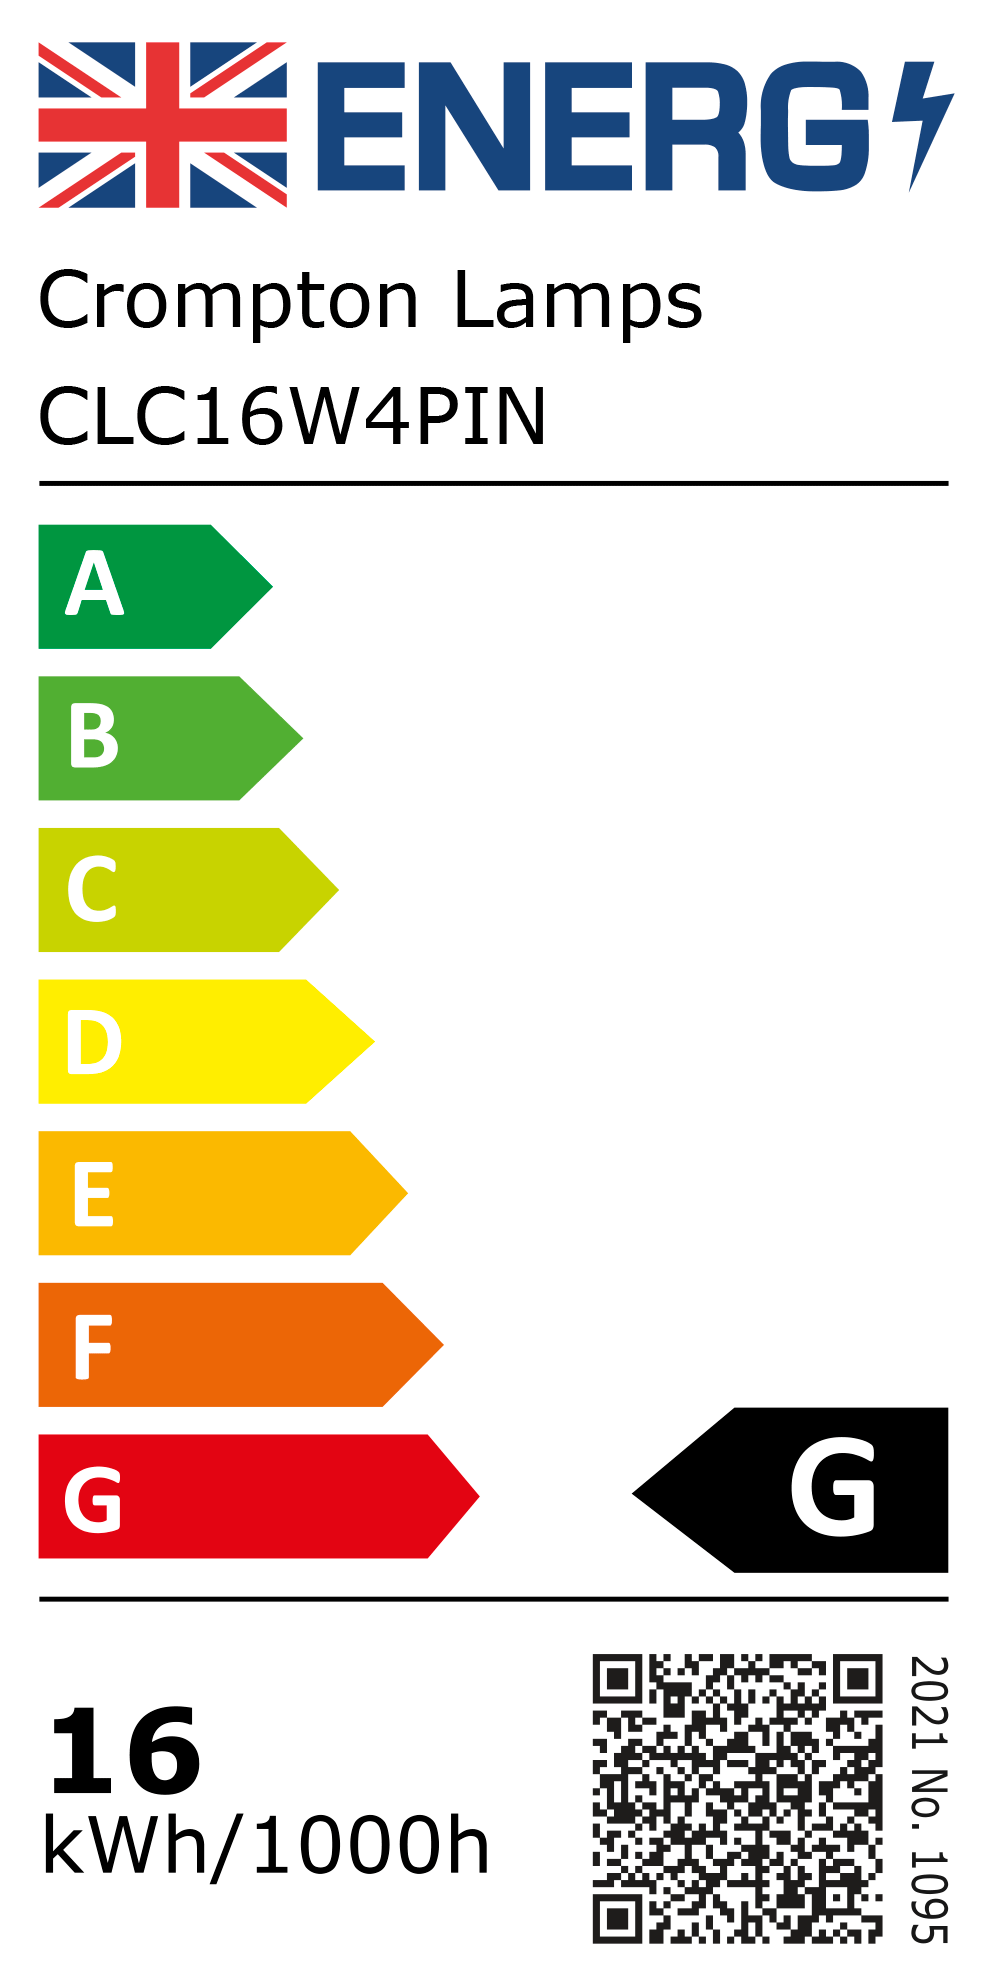 New 2021 Energy Rating Label: Stock Code CLC16W4PIN